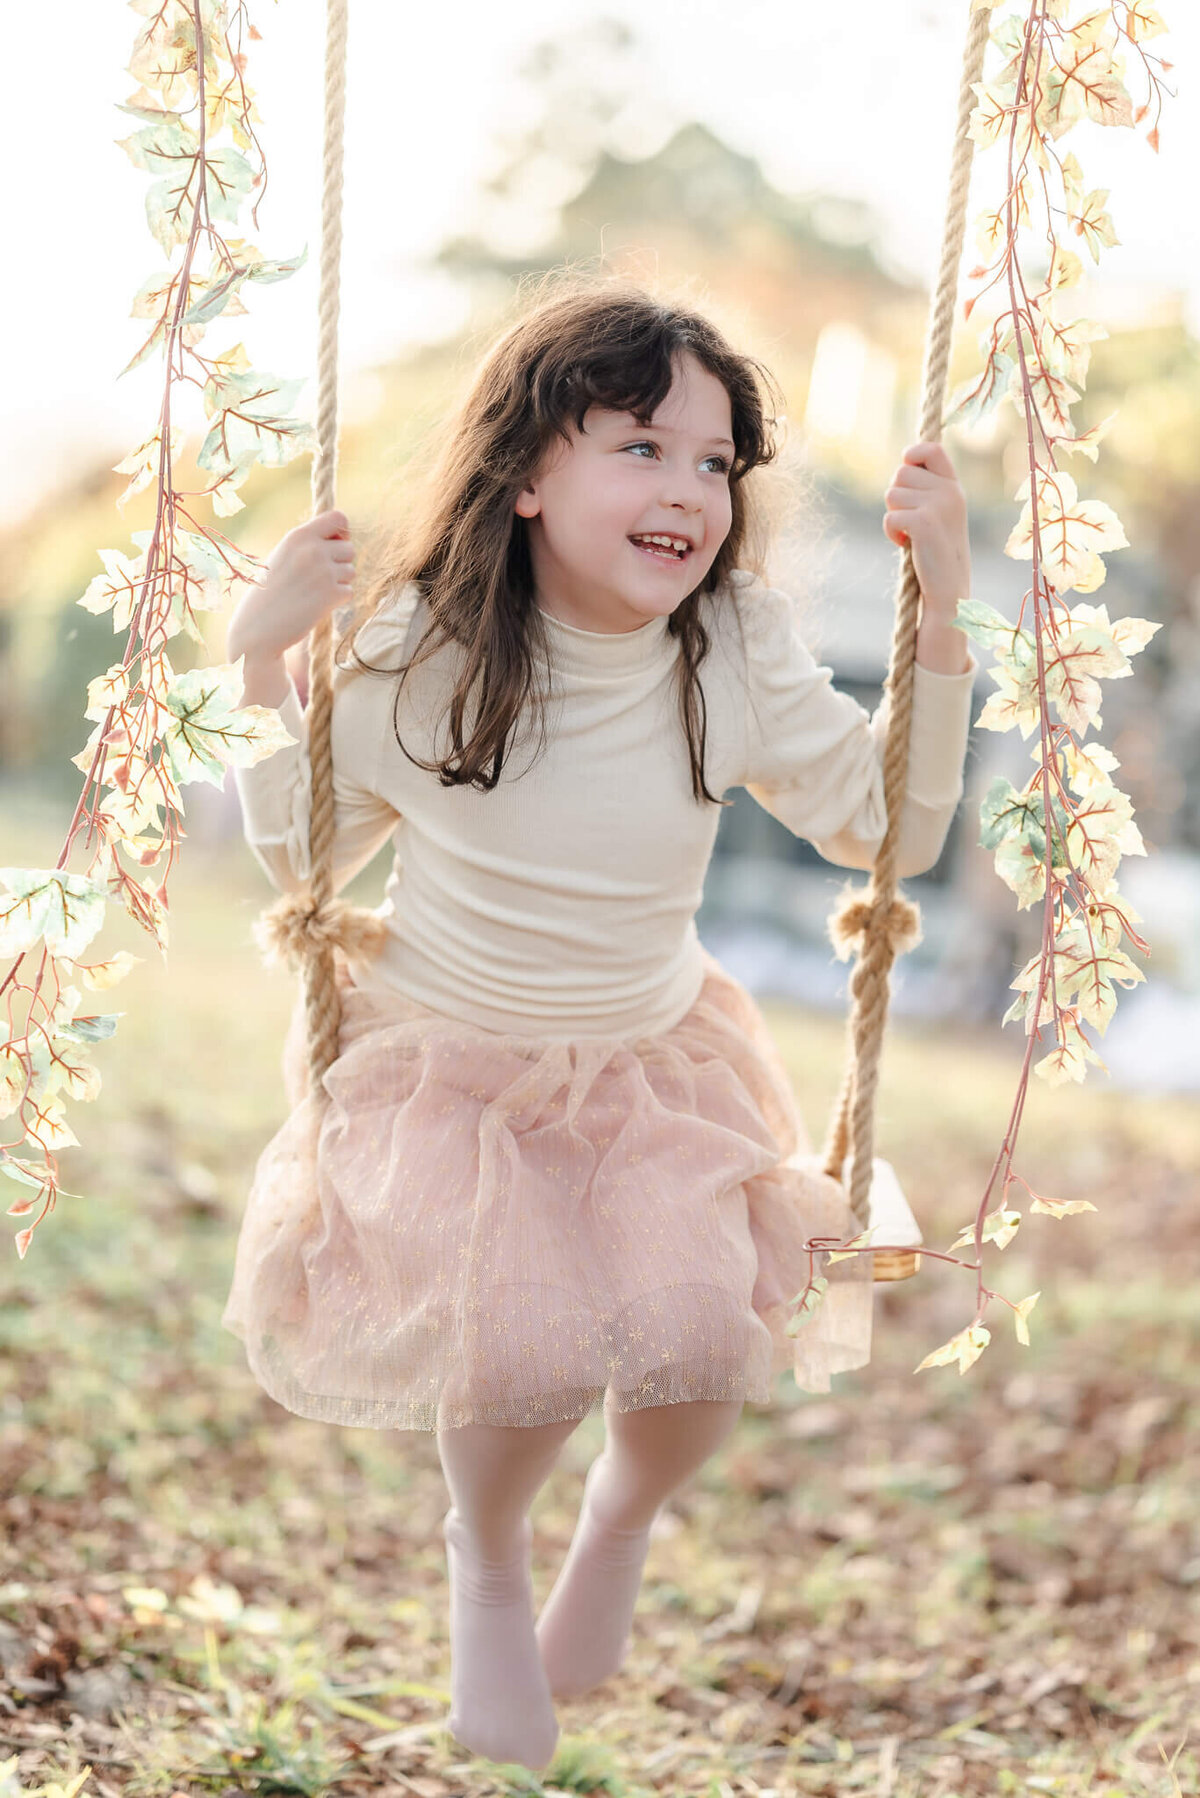 A young girl, wearing pink and cream smiles as she swings on a wooden swing.